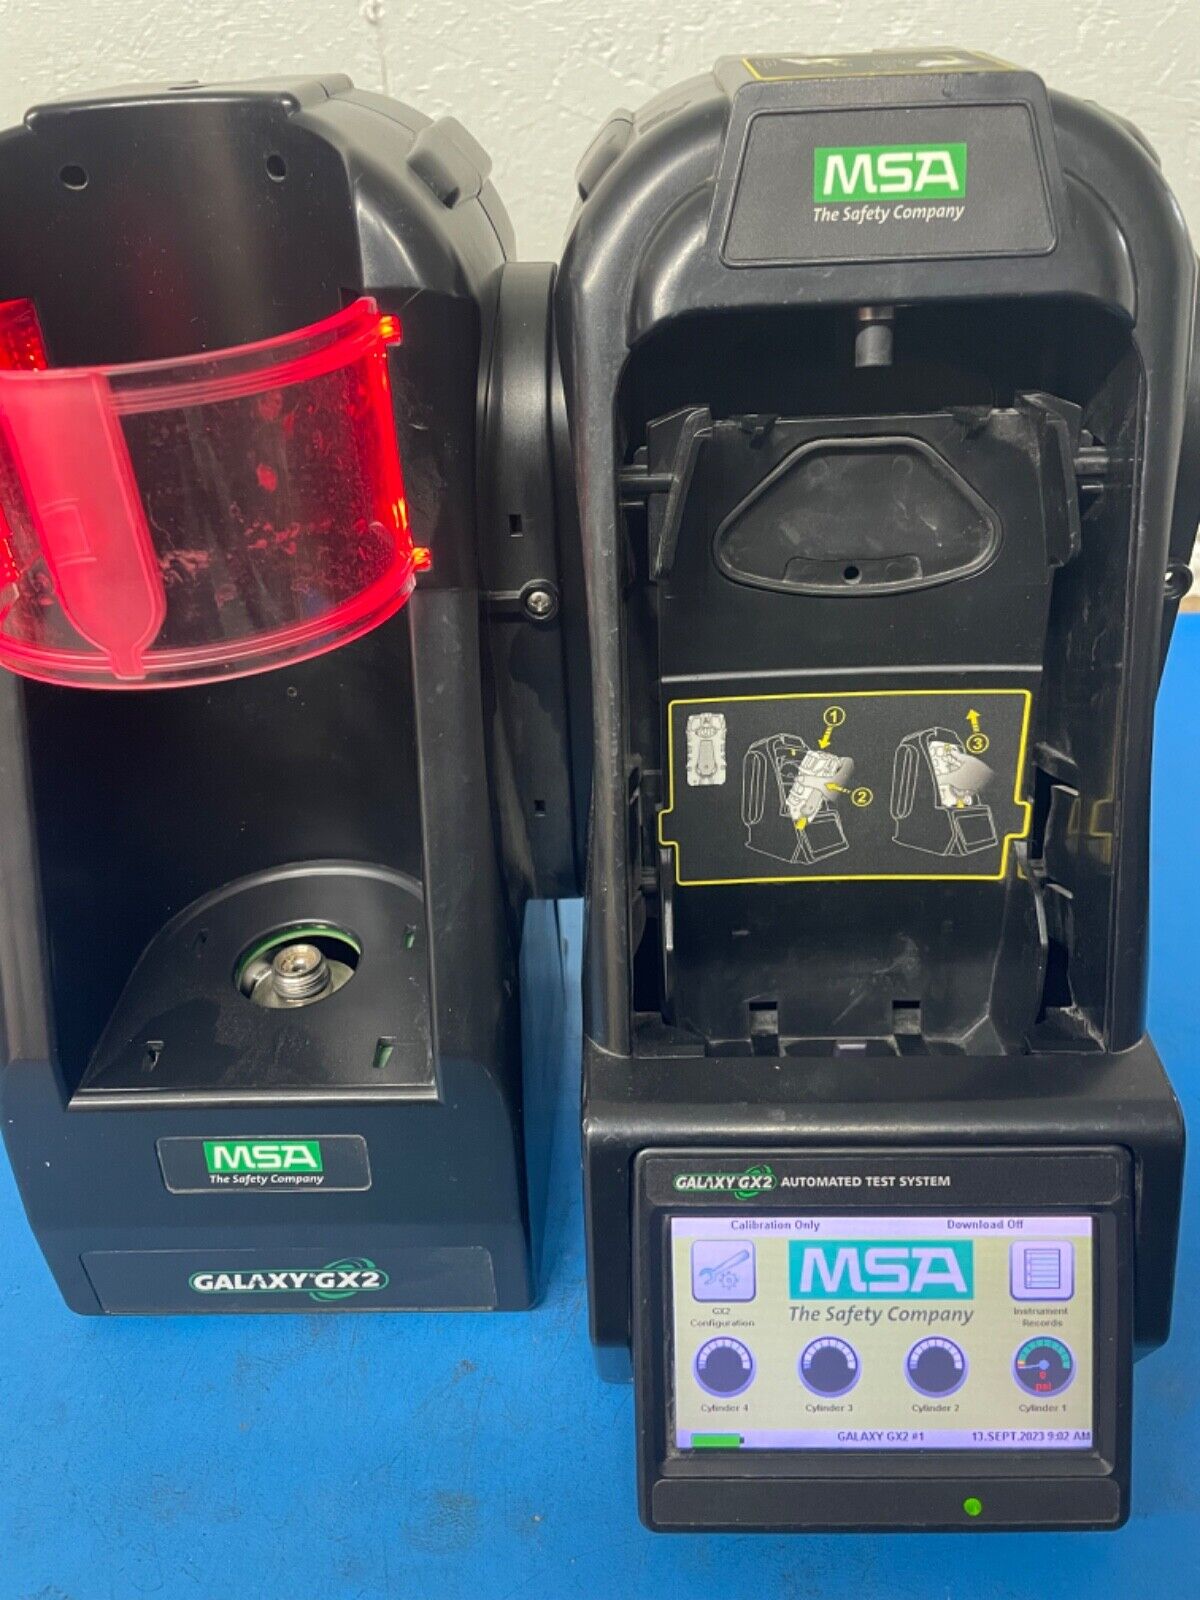 MSA Galaxy GX2, ALTAIR 5/5X AND ELECTRONIC CYLINDER HOLDER